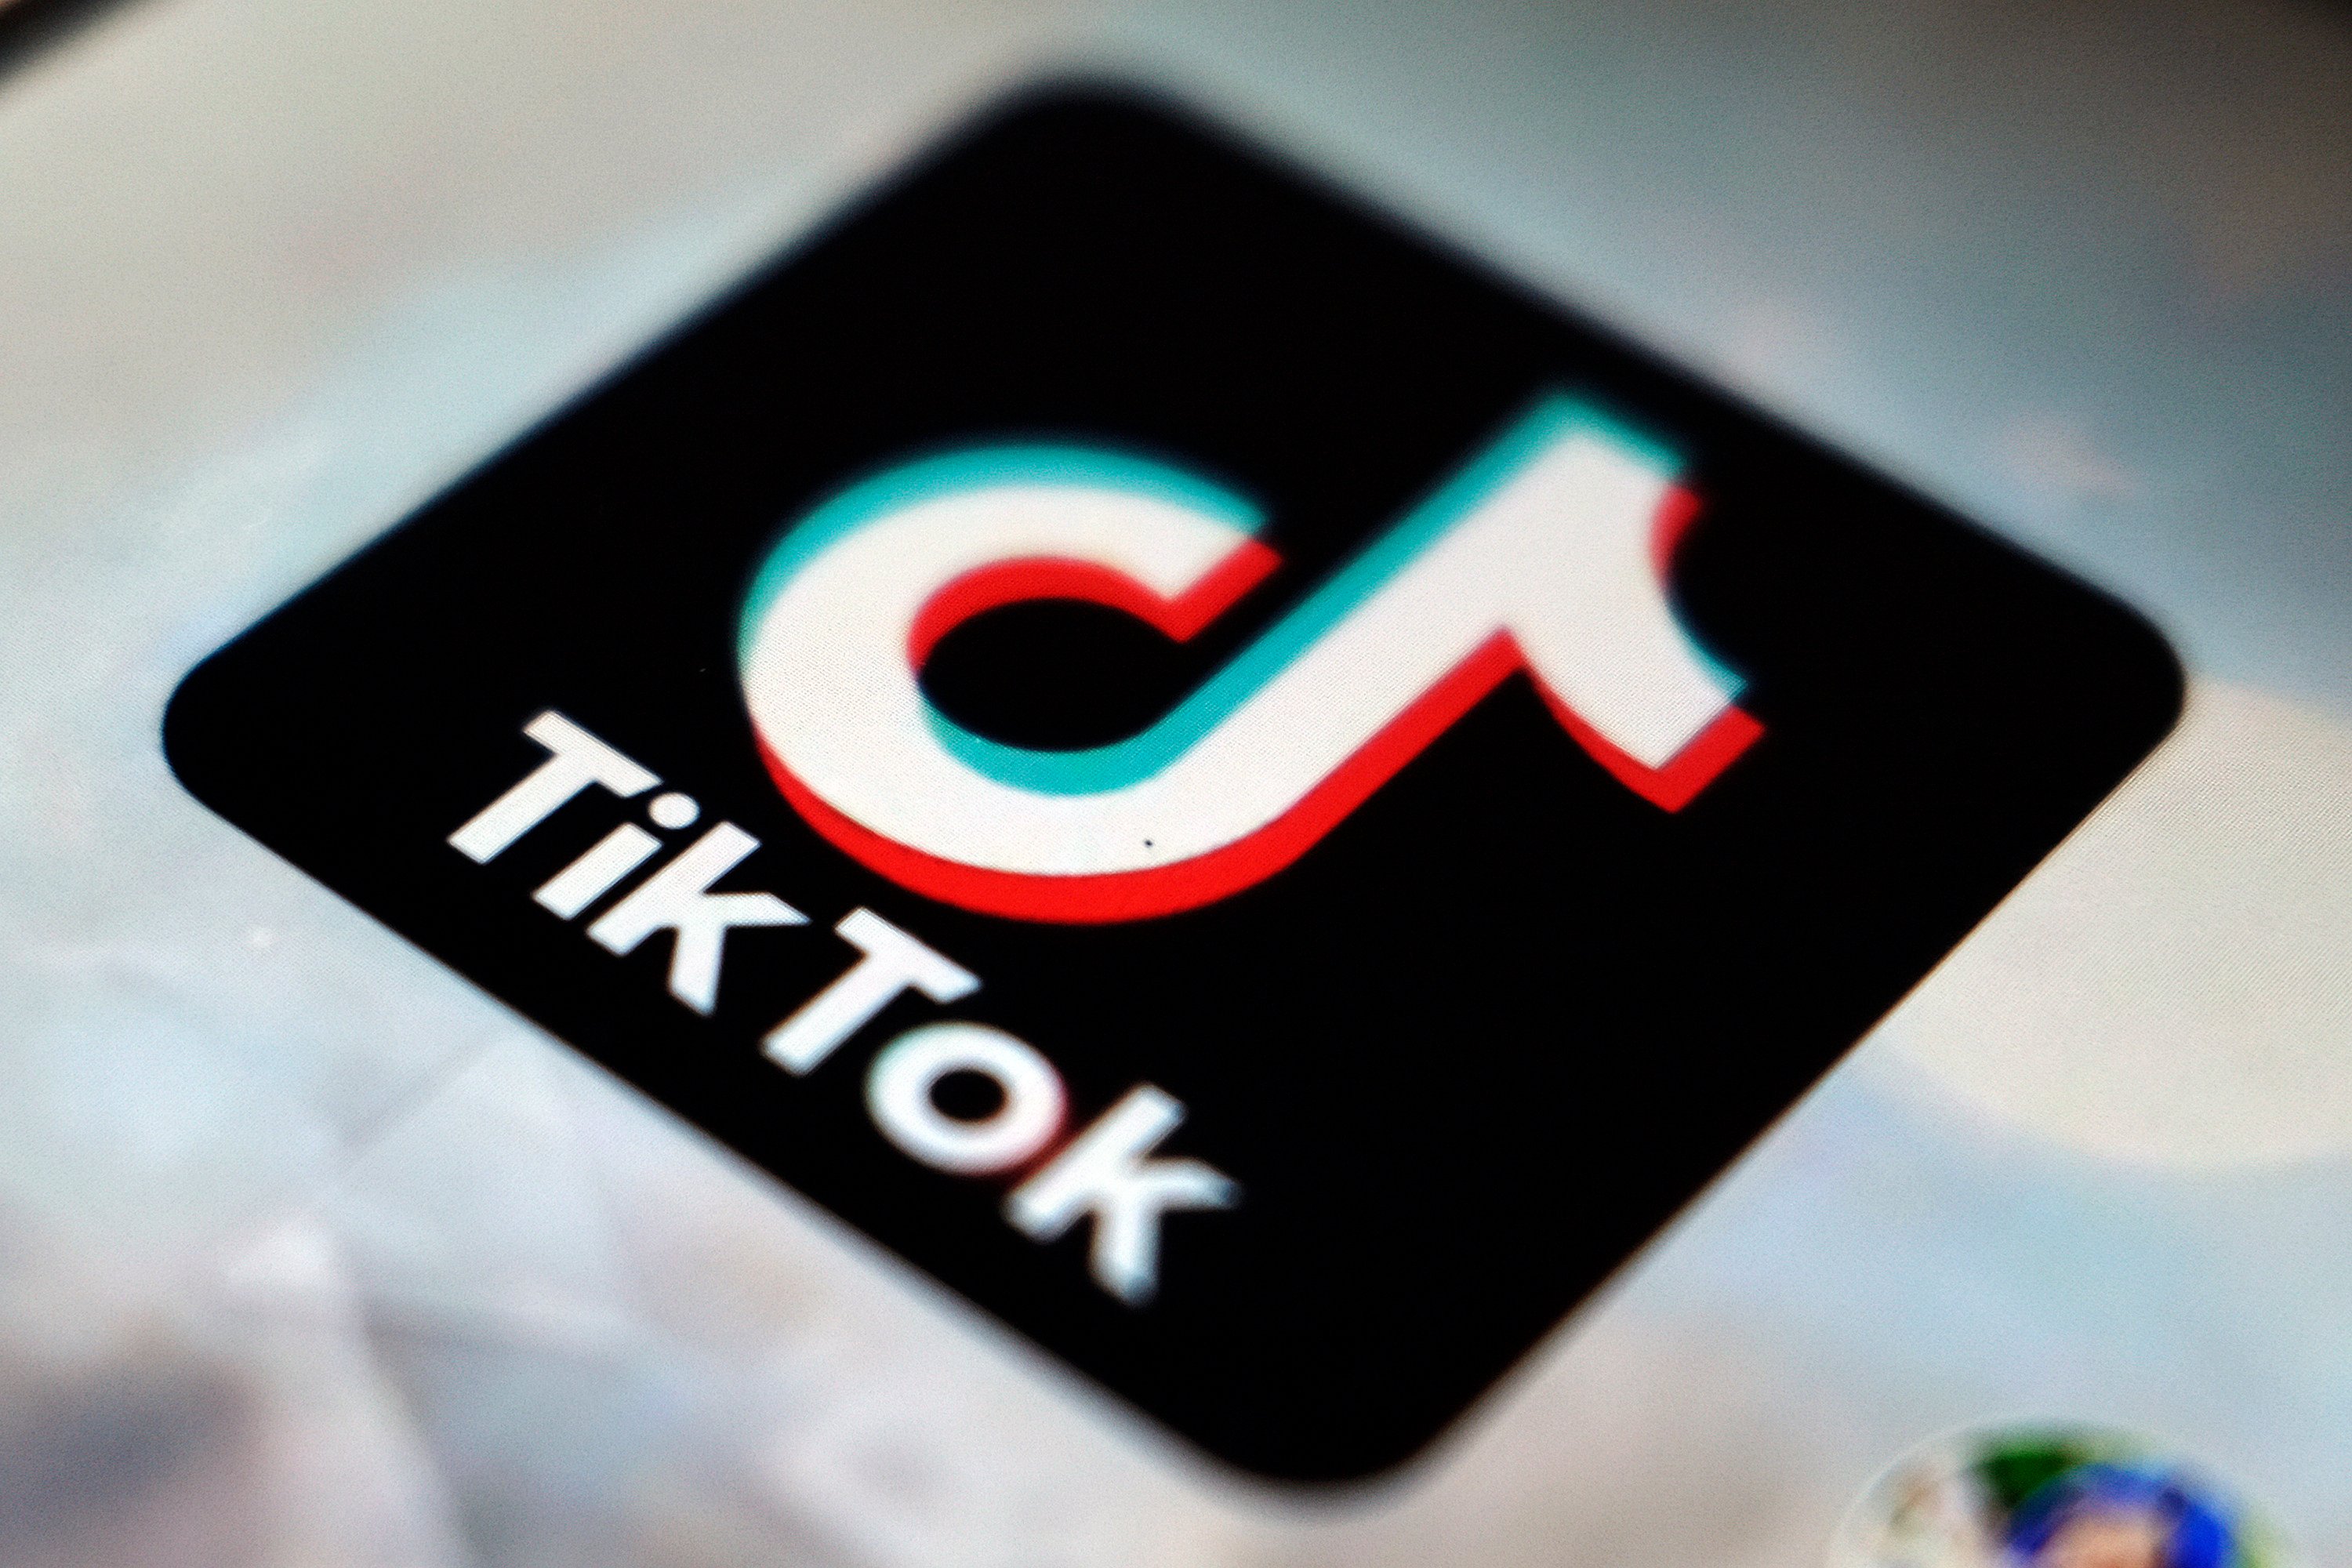 TikTok Storefront discontinued globally - ChannelX